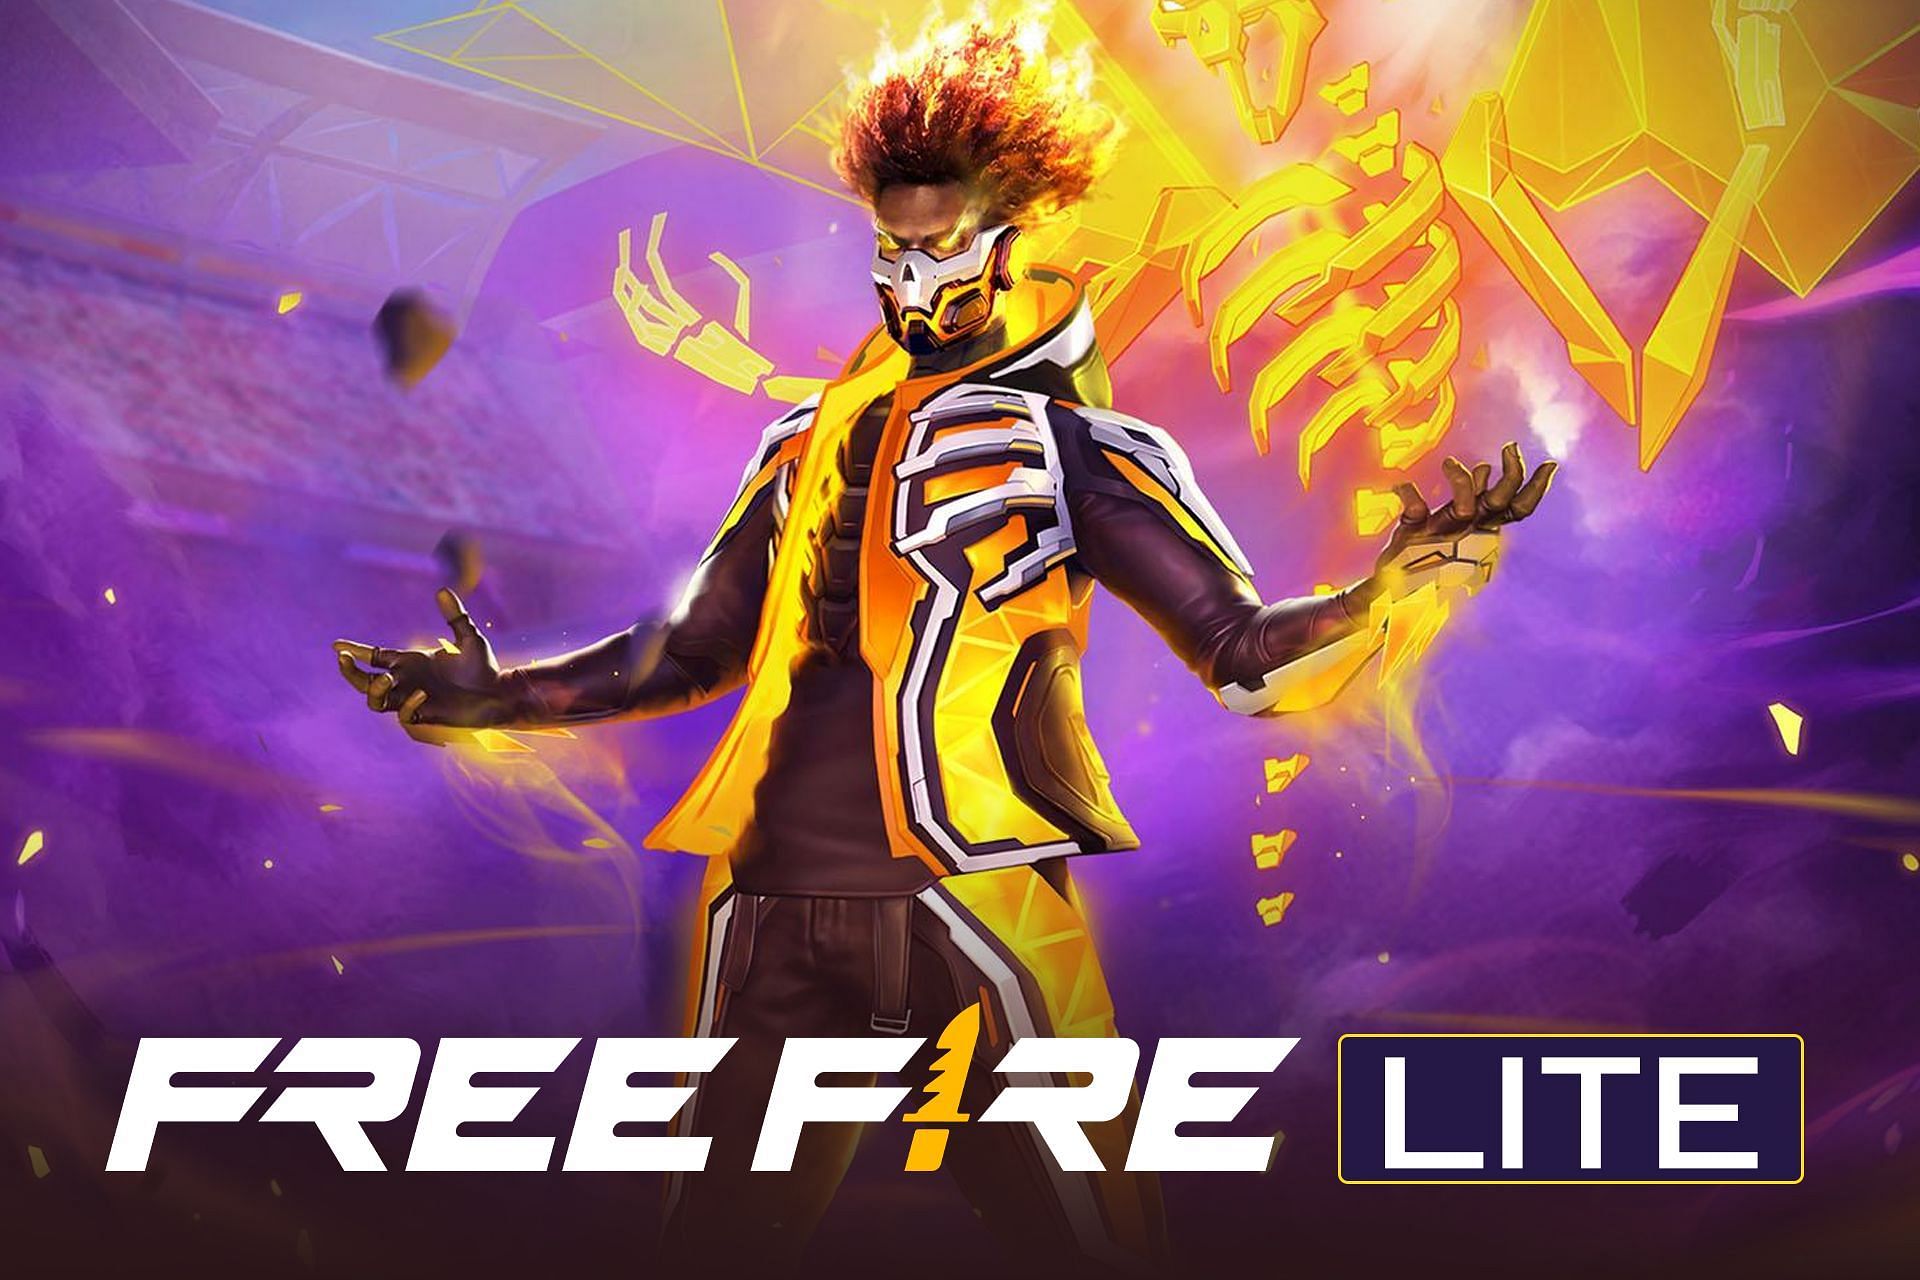 Fact Check: Is Free Fire Lite real?